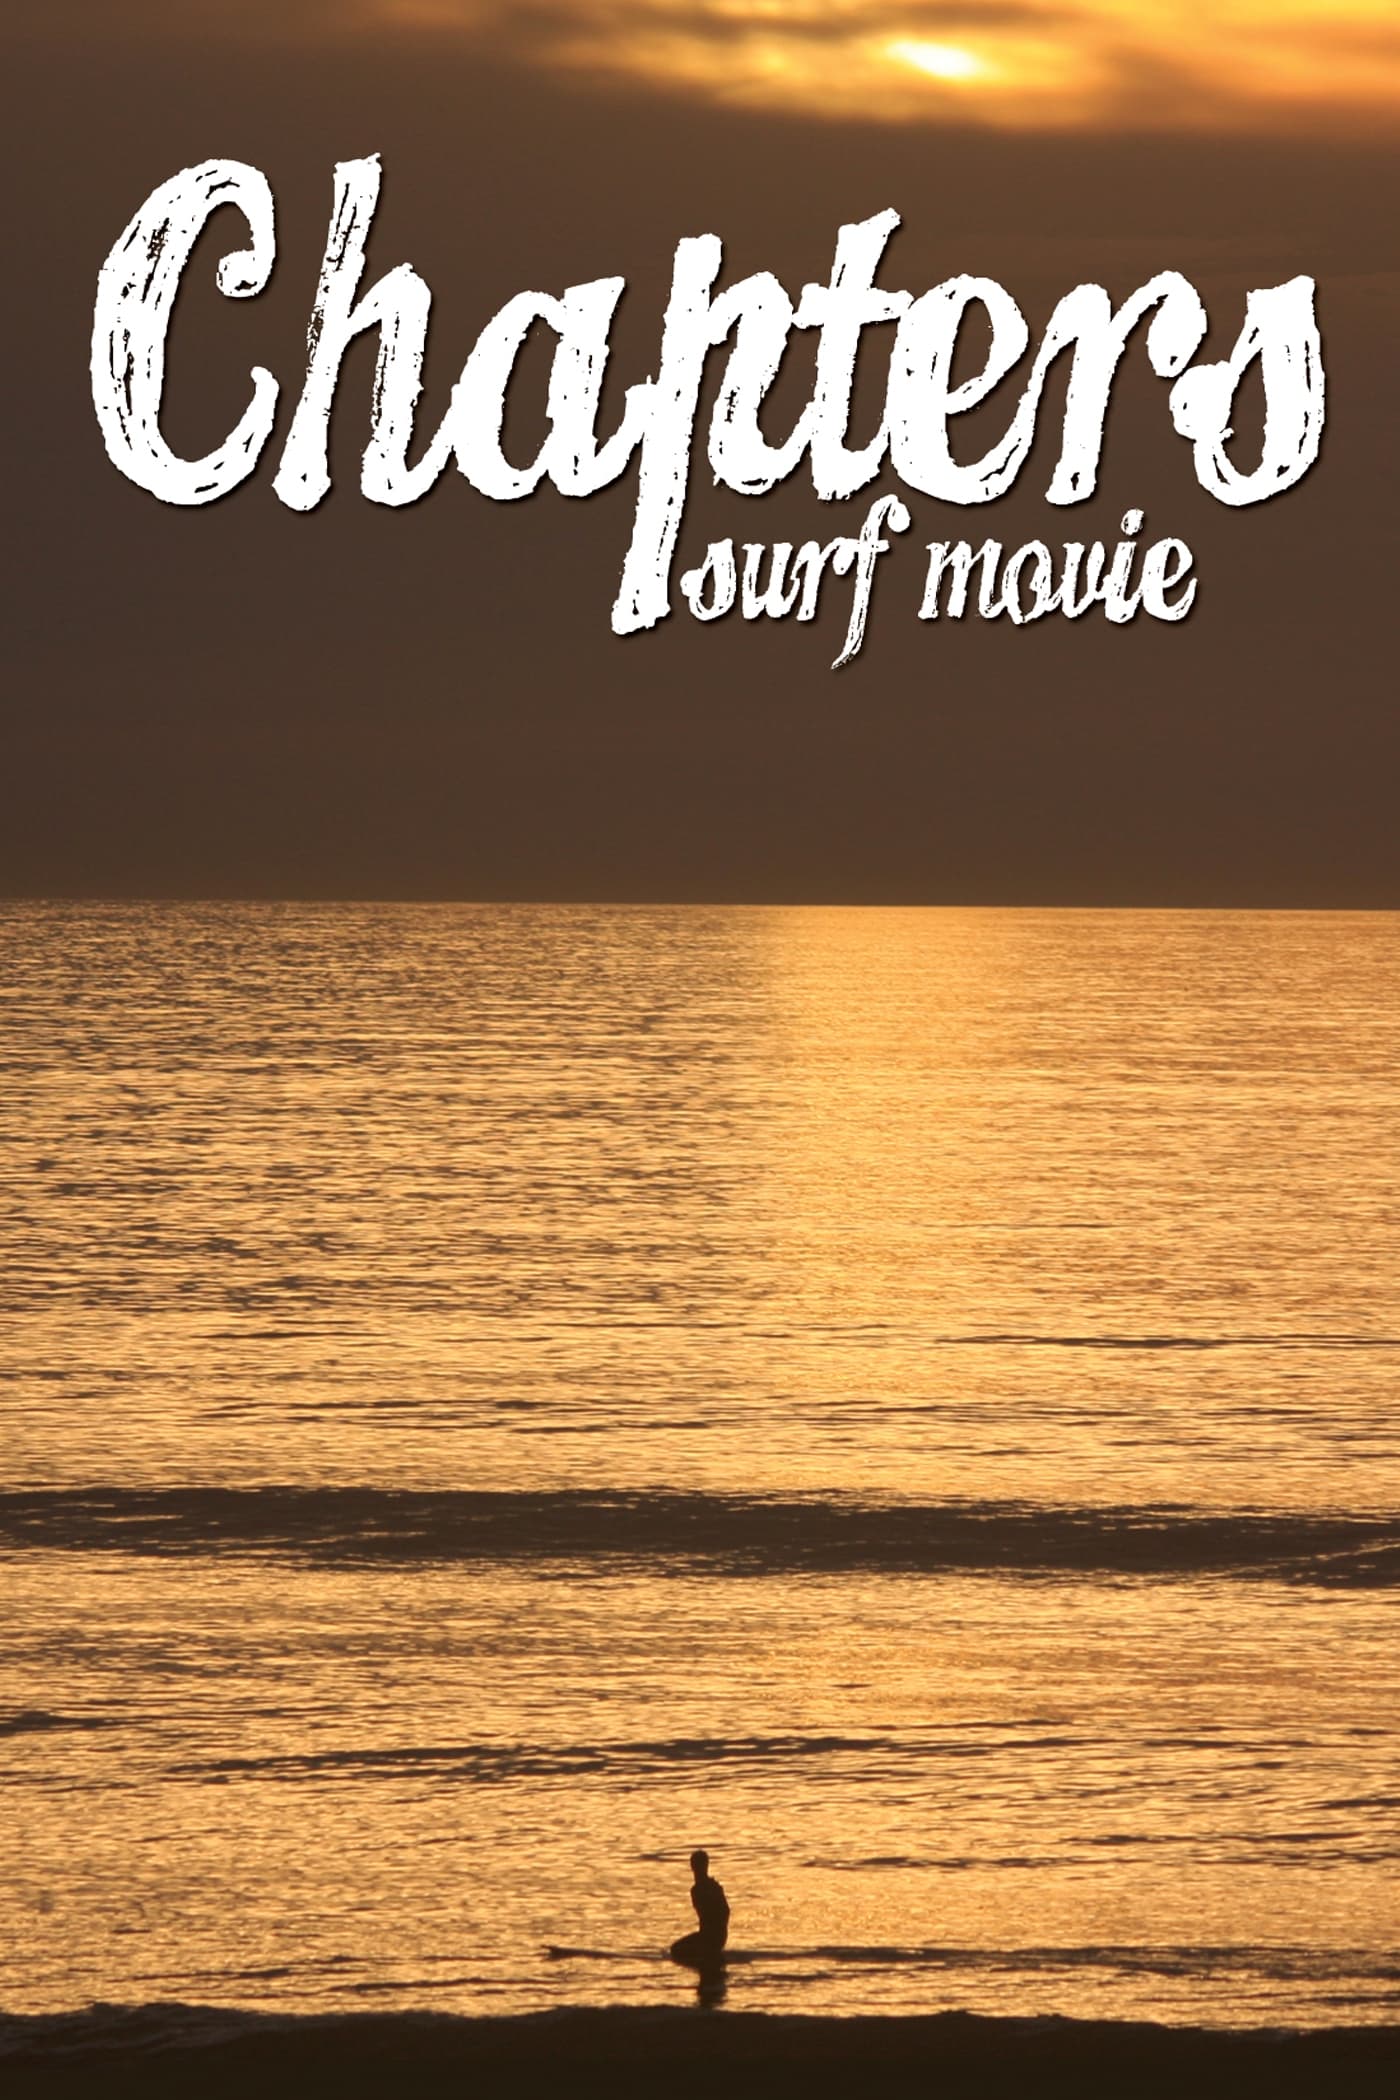 Chapters Surf Movie